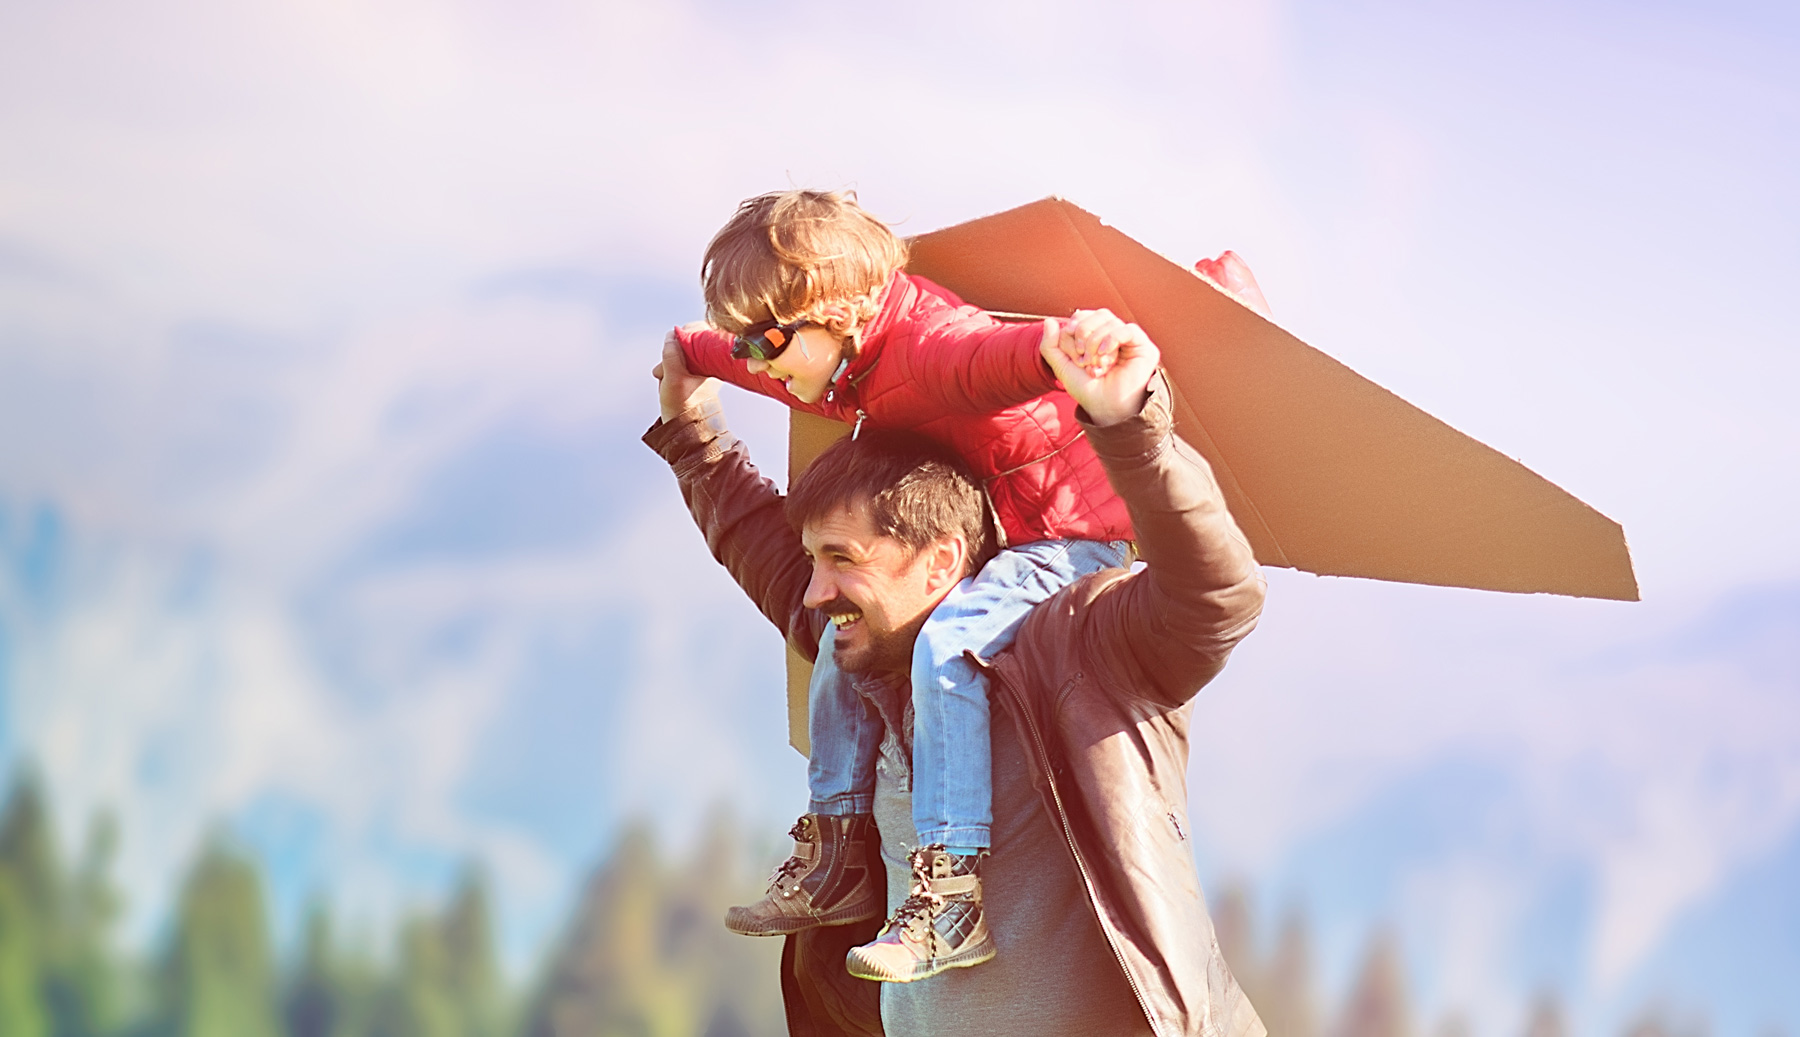 dad with son on his shoulders pretending to fly like an airplane